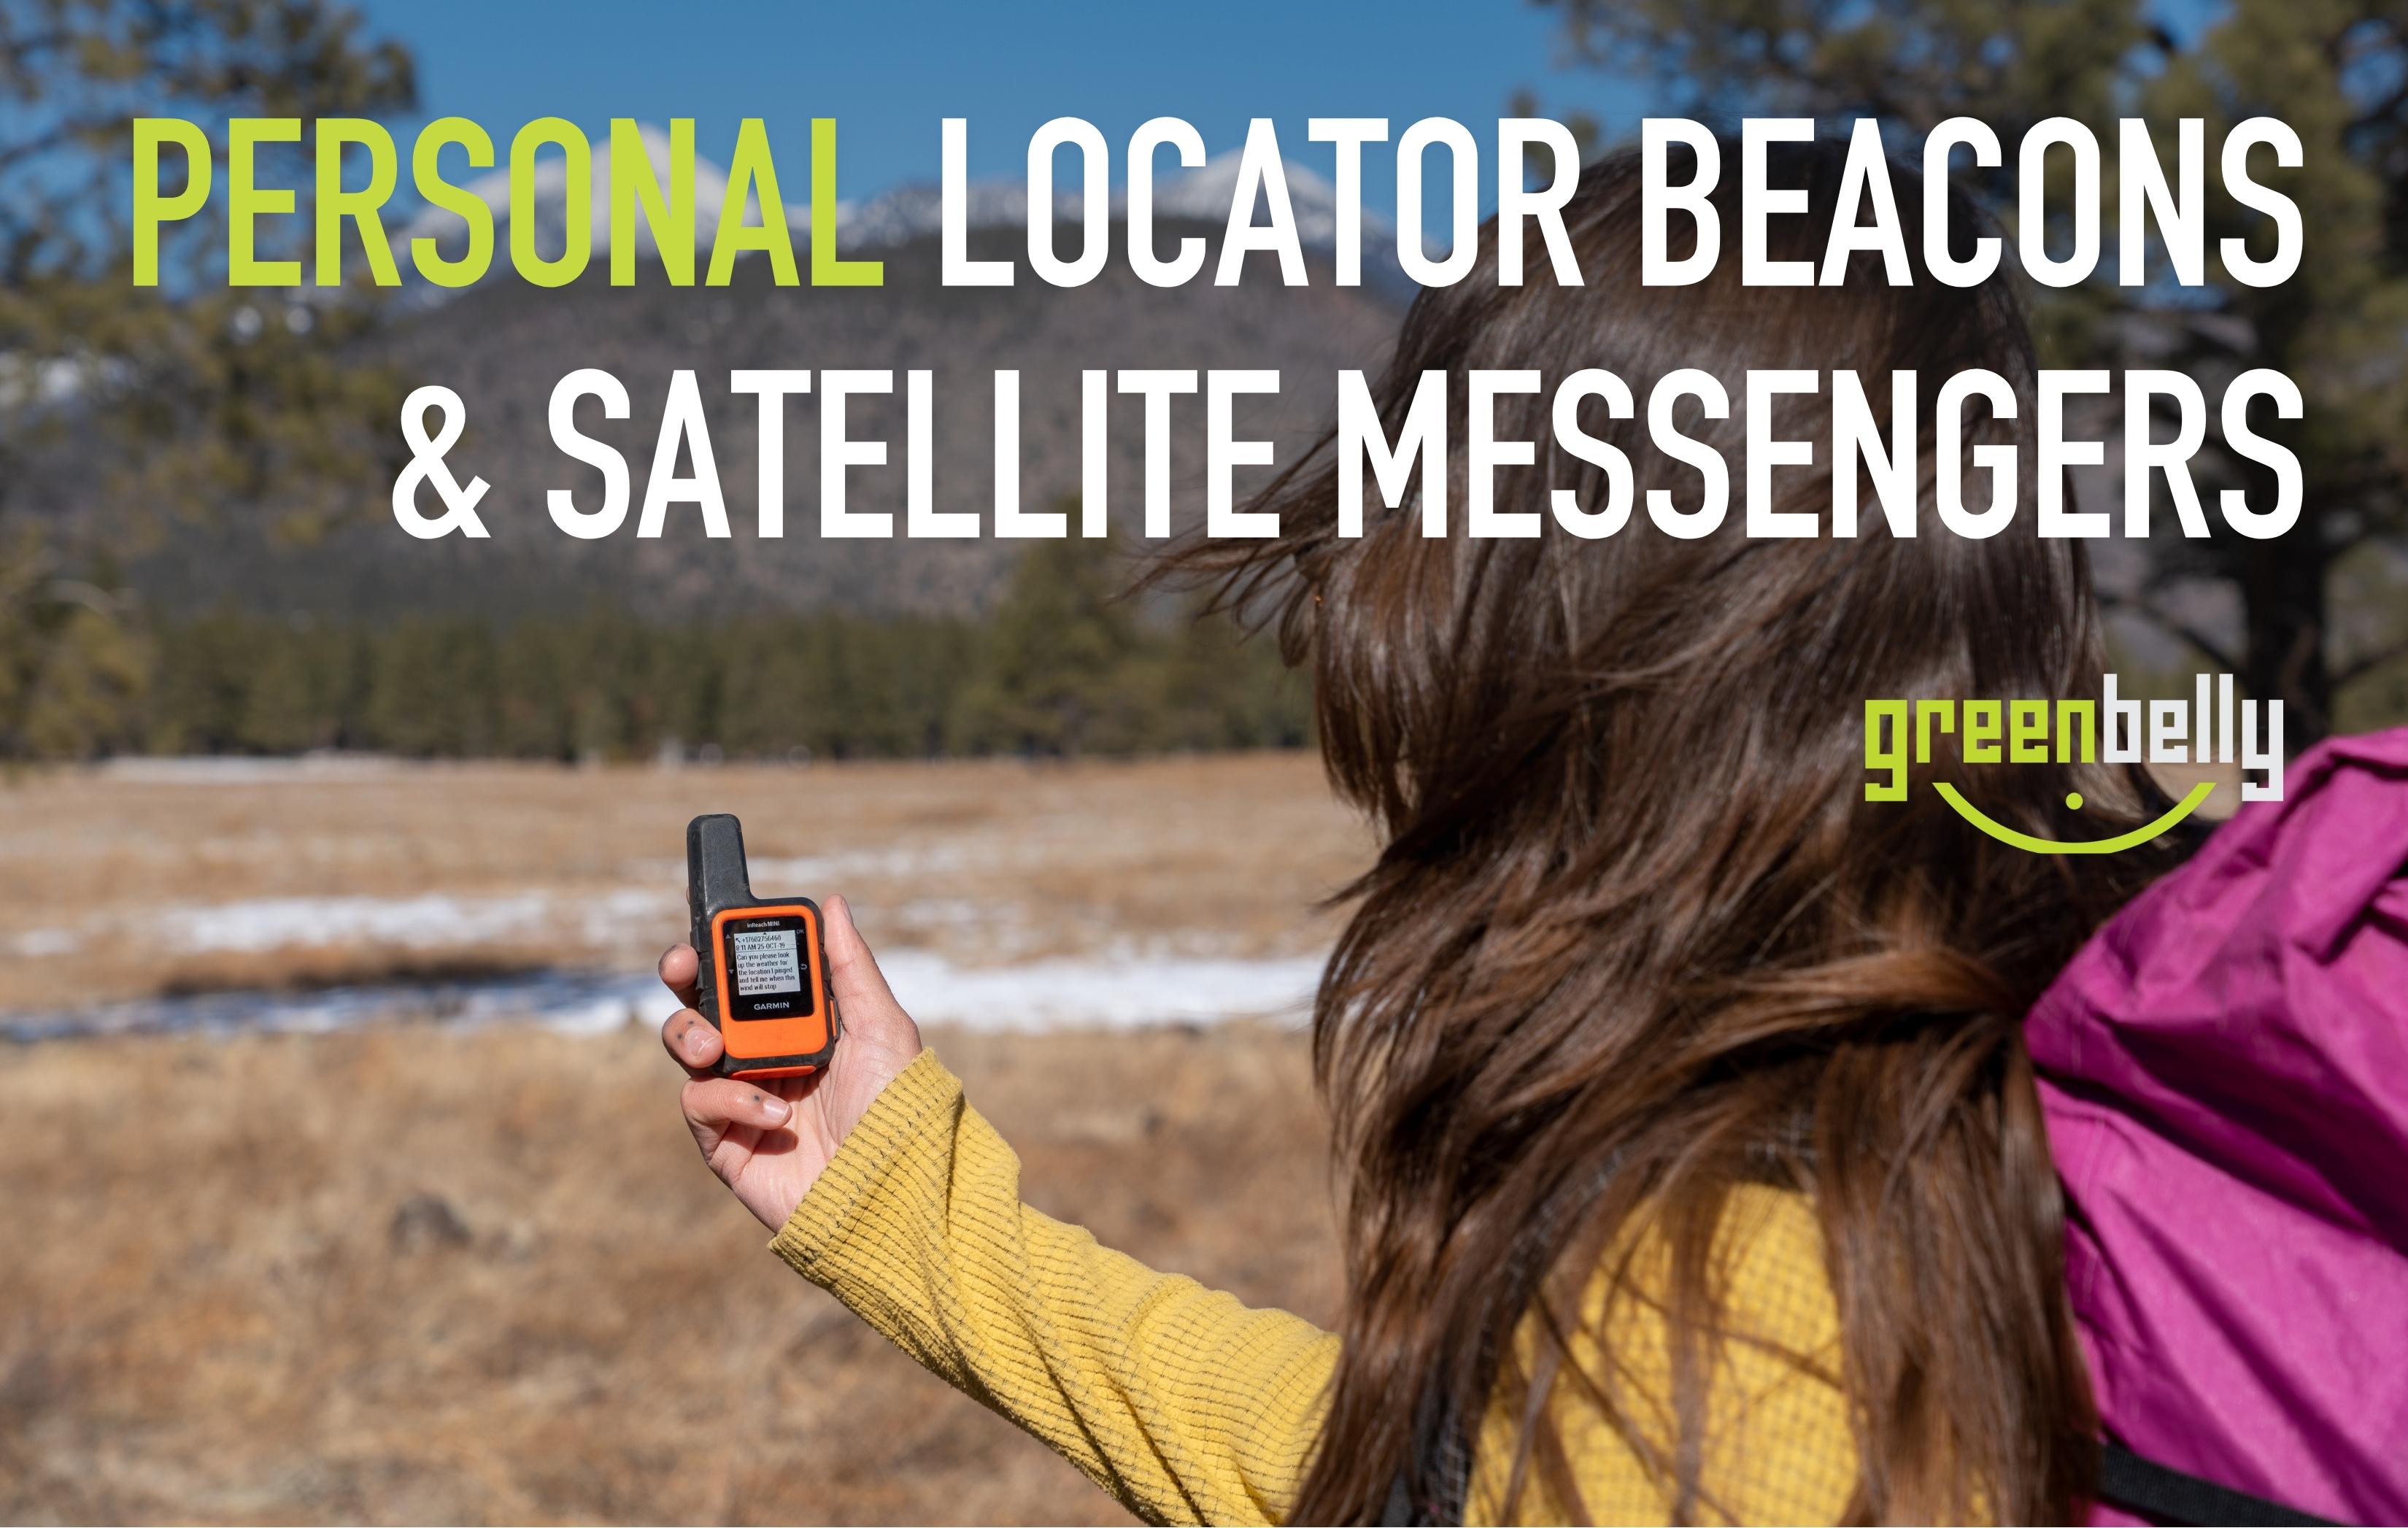 7 Best Personal Locator Beacons for Emergency Situations 22839